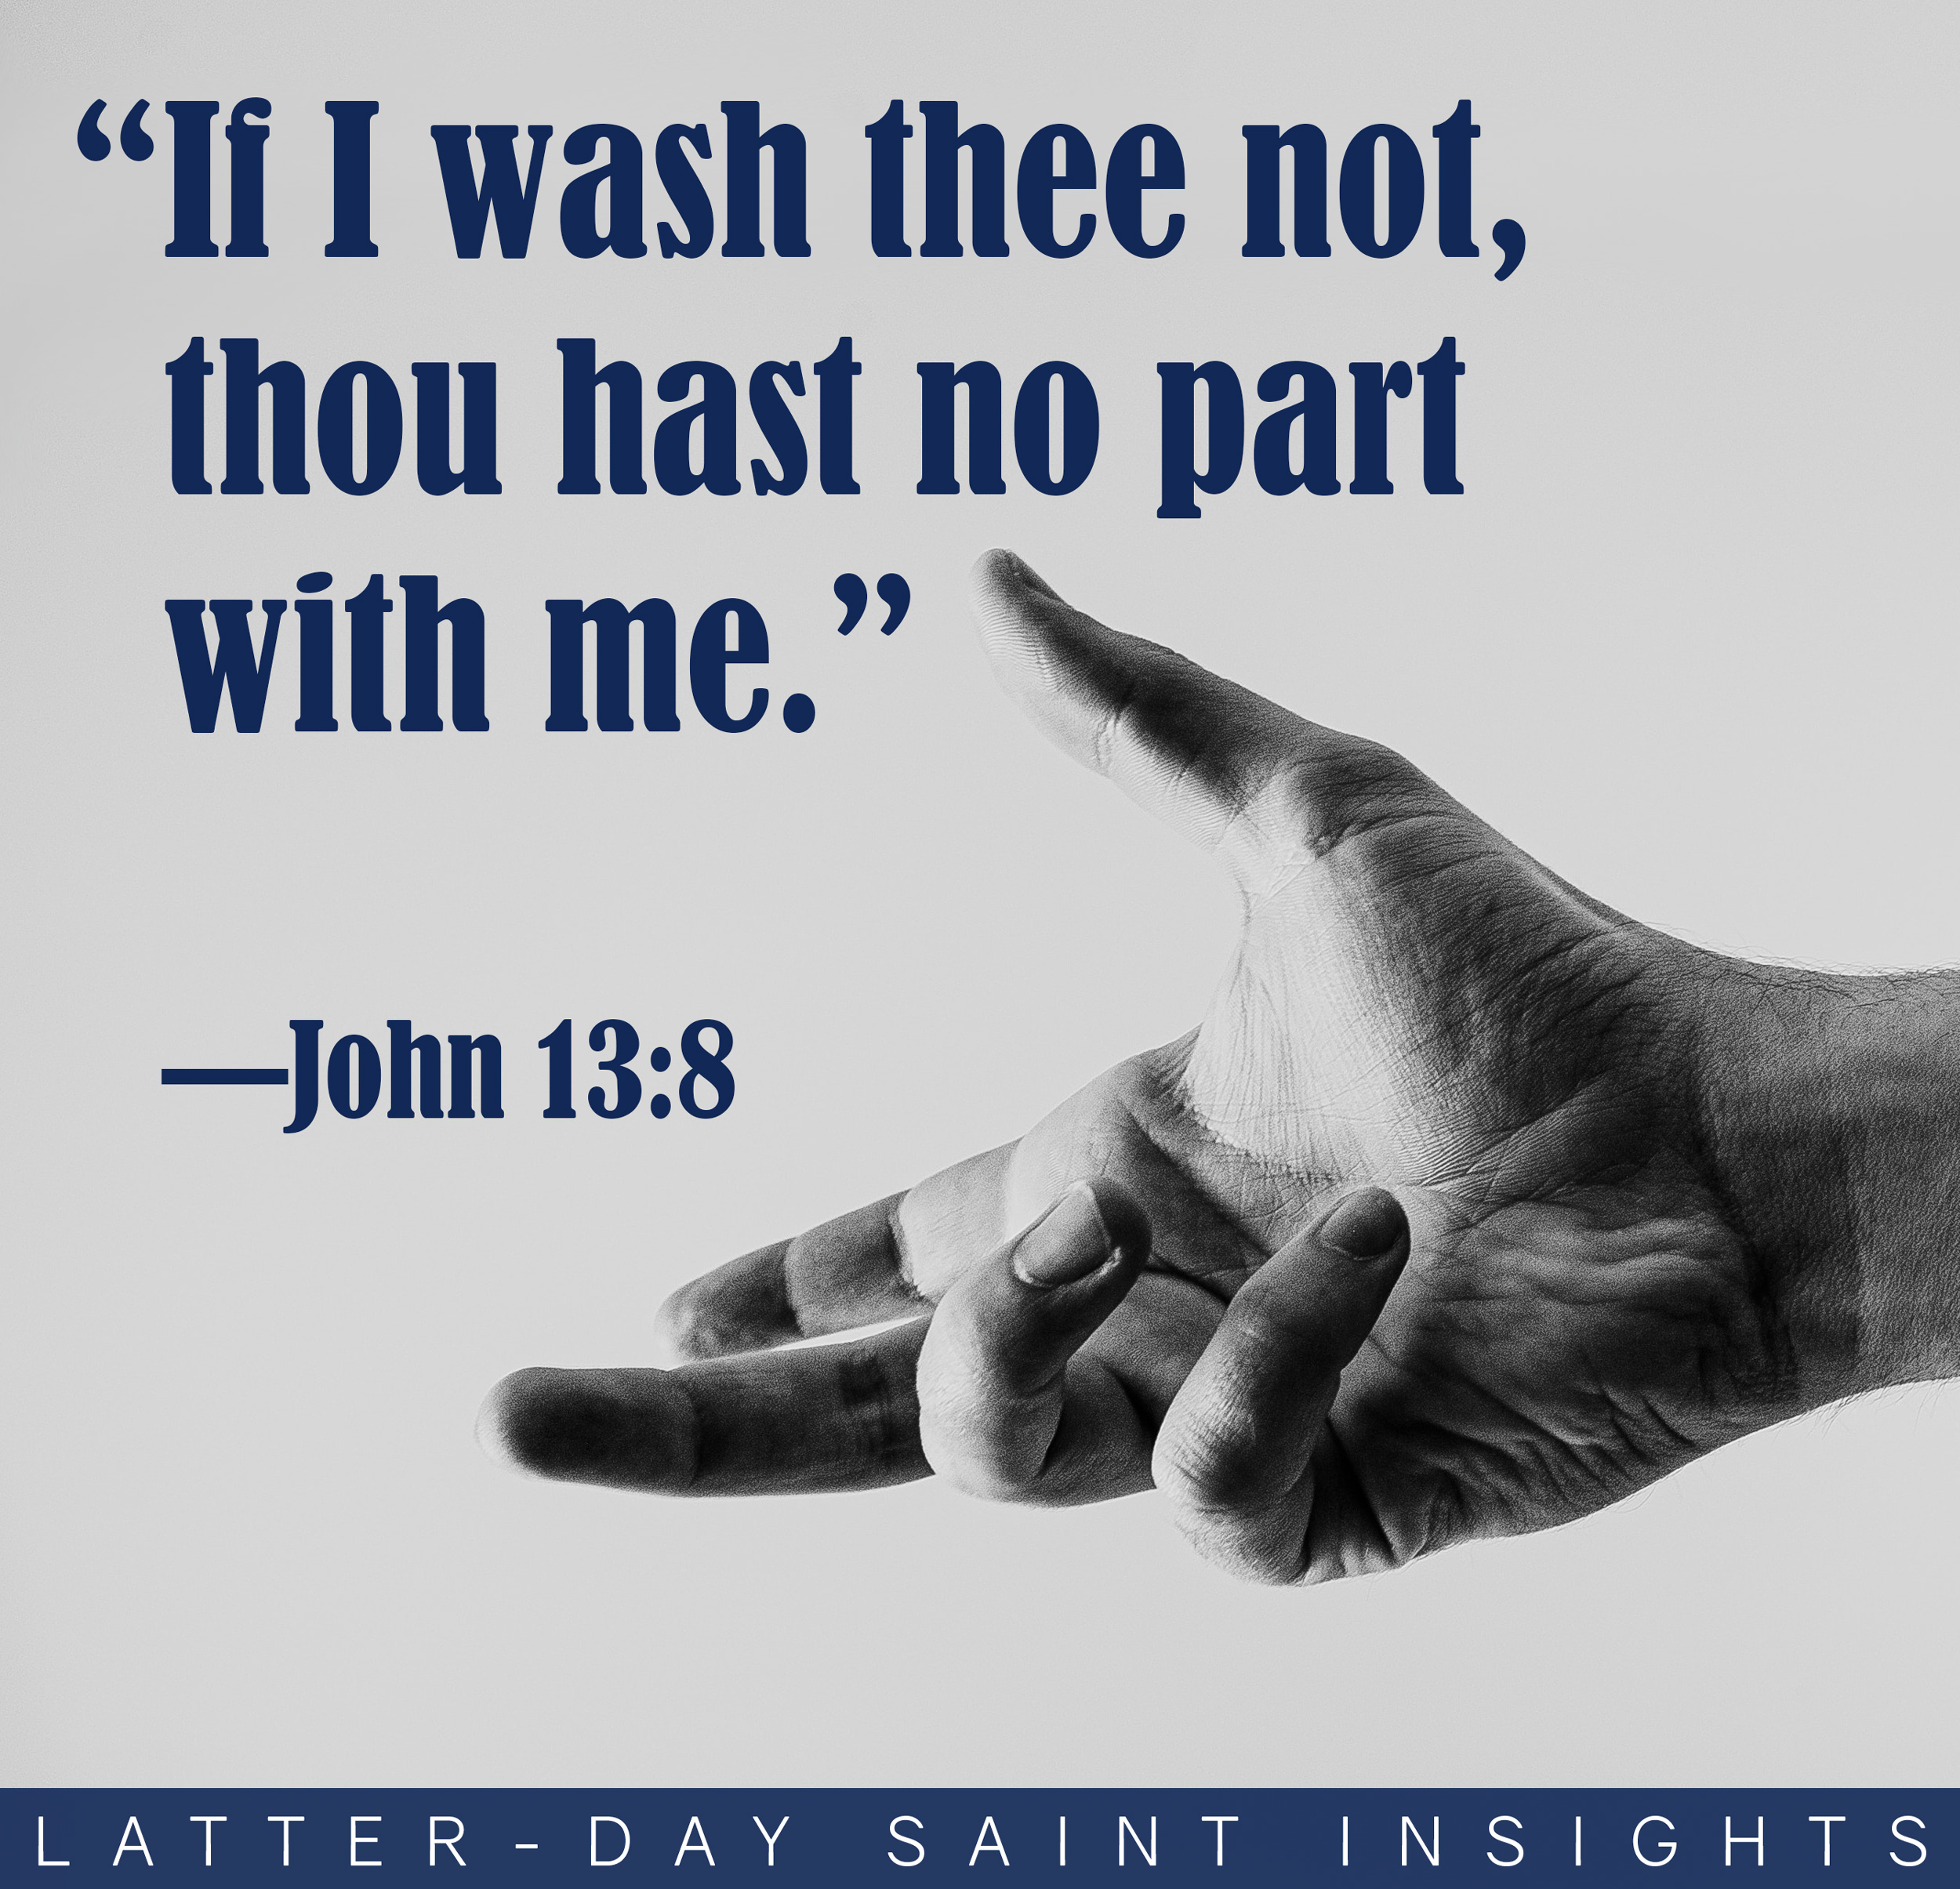 A hand reaches out in black and white with a bible quote from John 13:8 that says, "If I wash thee not, thou hast no part with me."